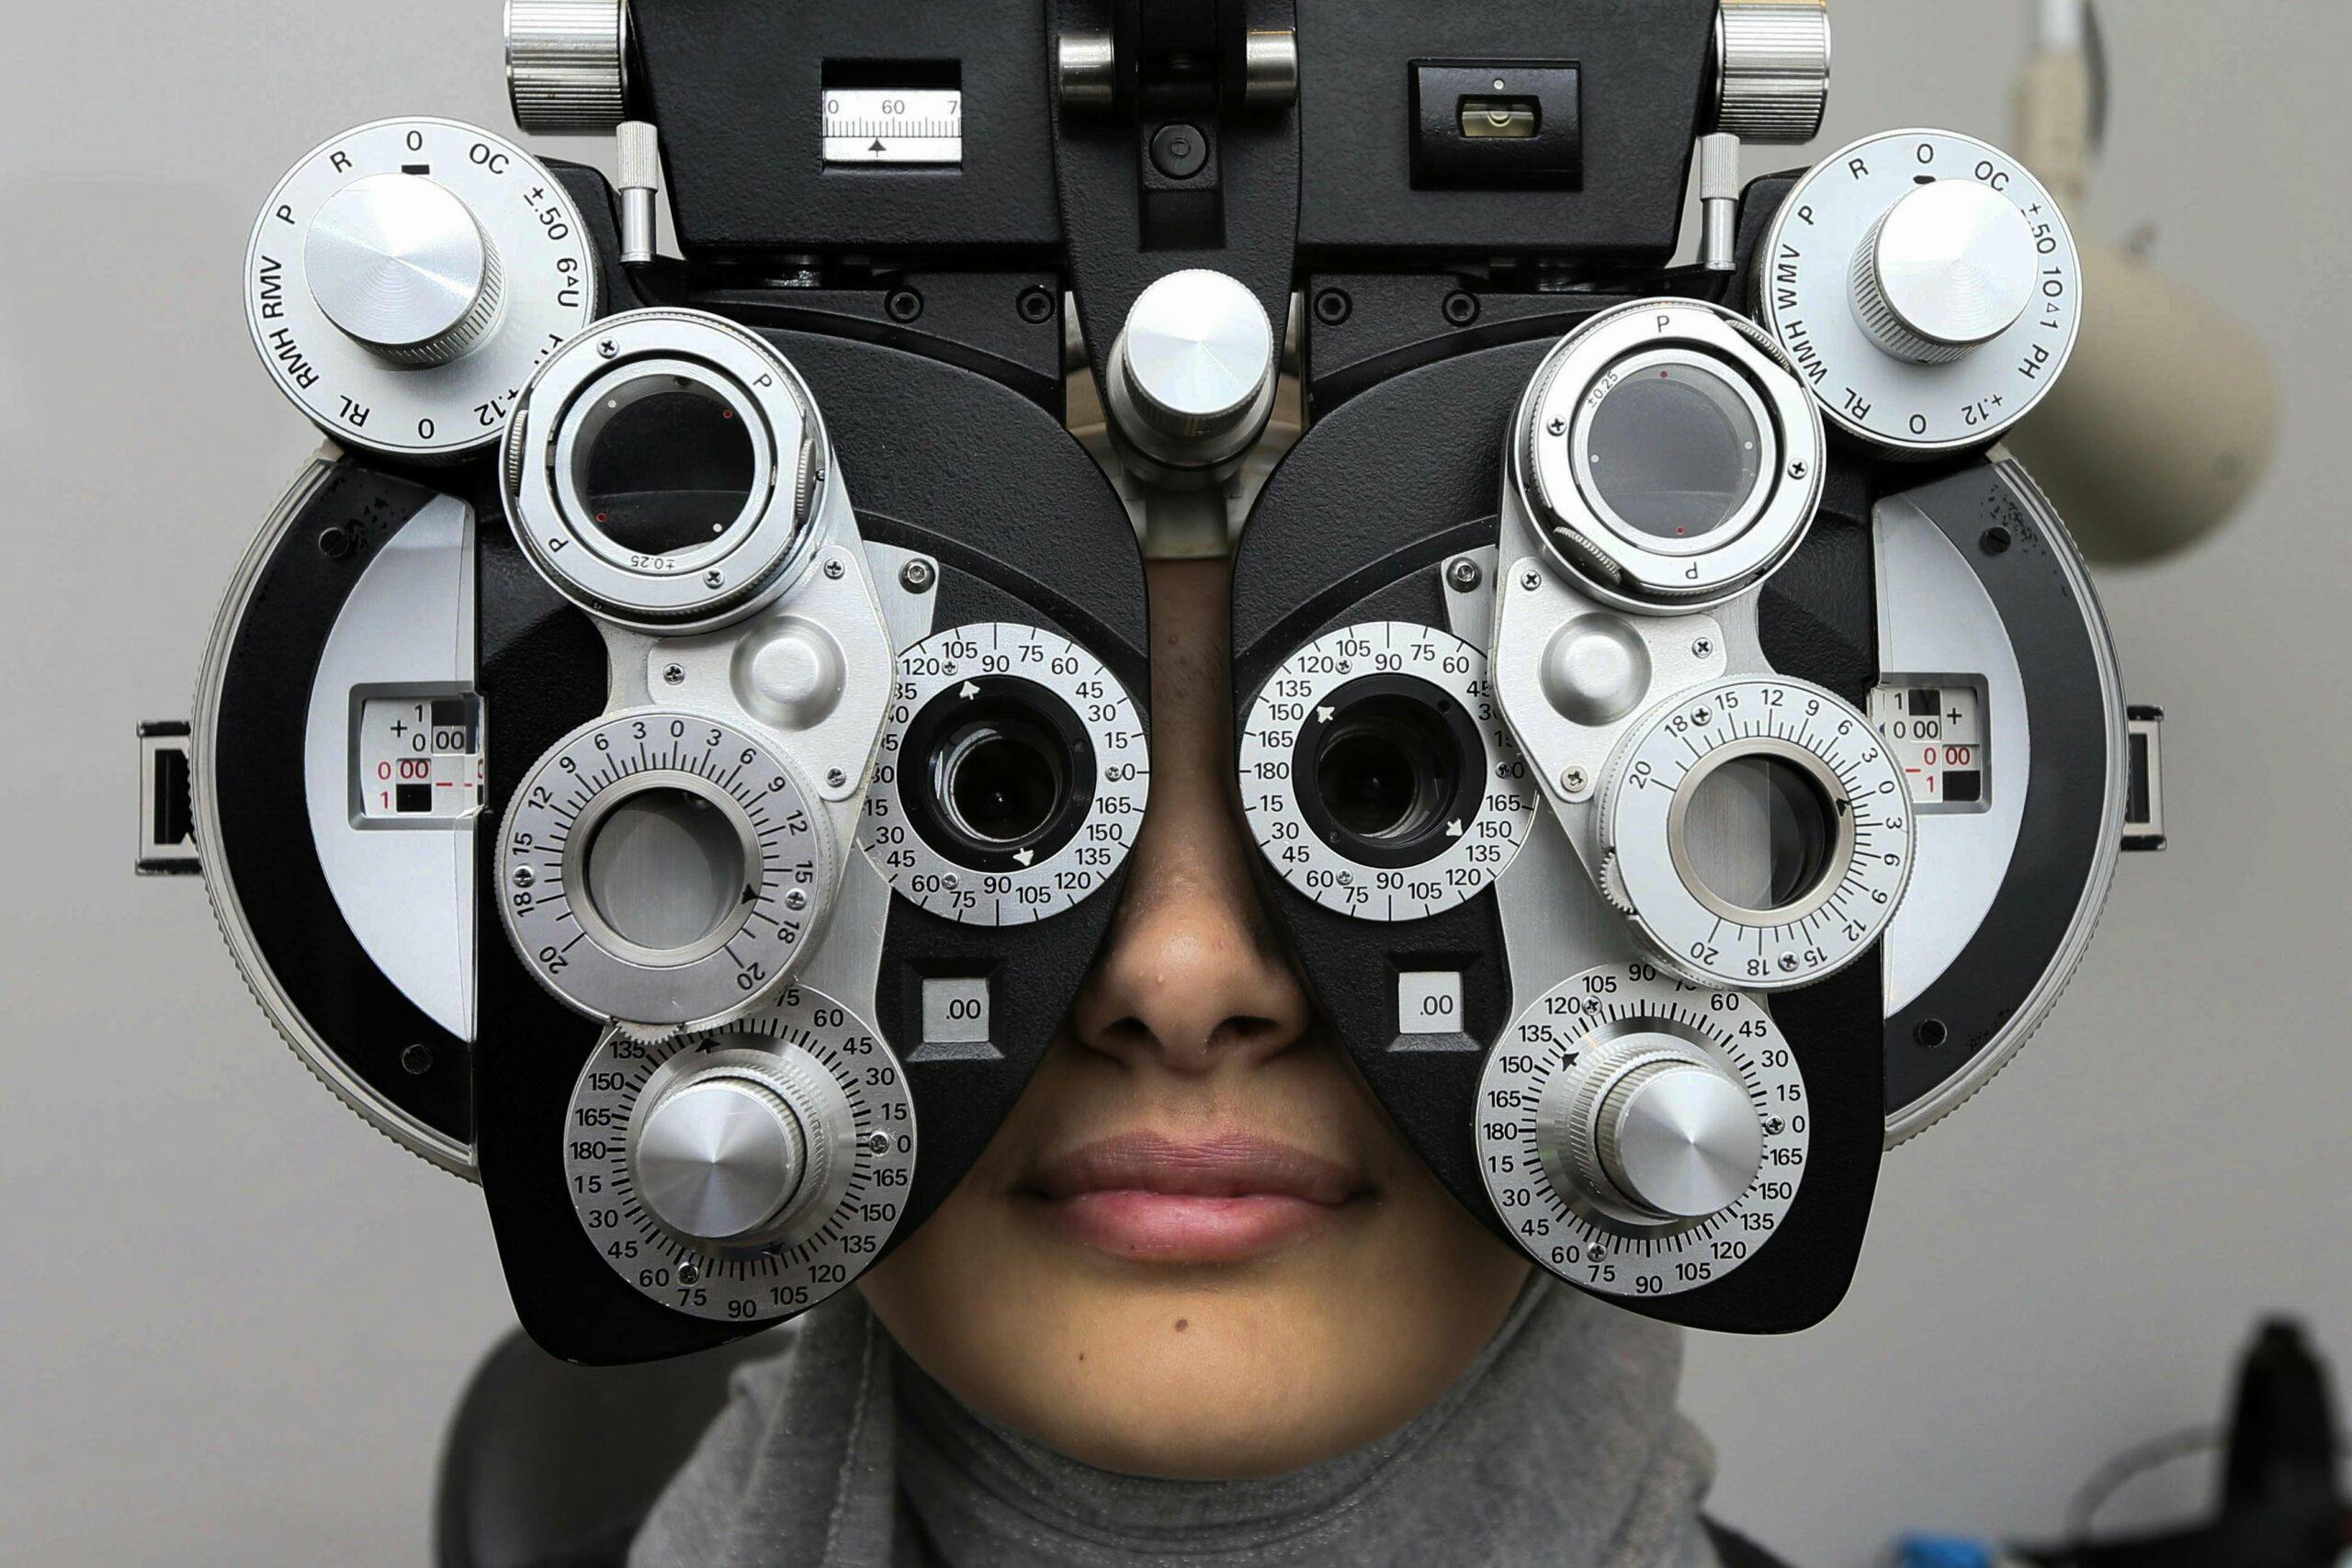 Talks between Ontario’s optometrists and government remain stalled